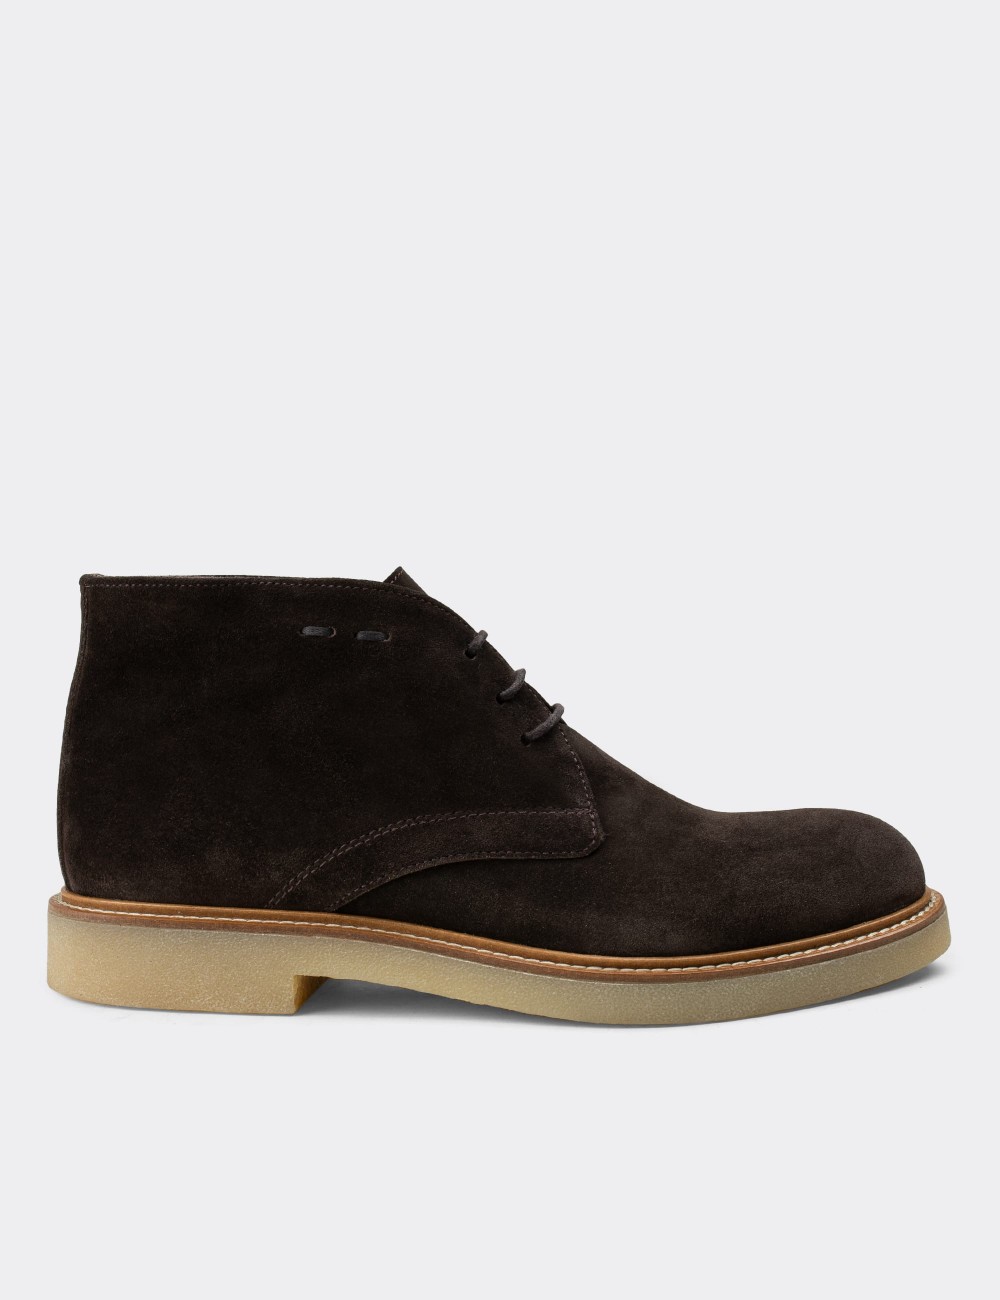 Brown Suede Leather Desert Boots - 01295MKHVC05